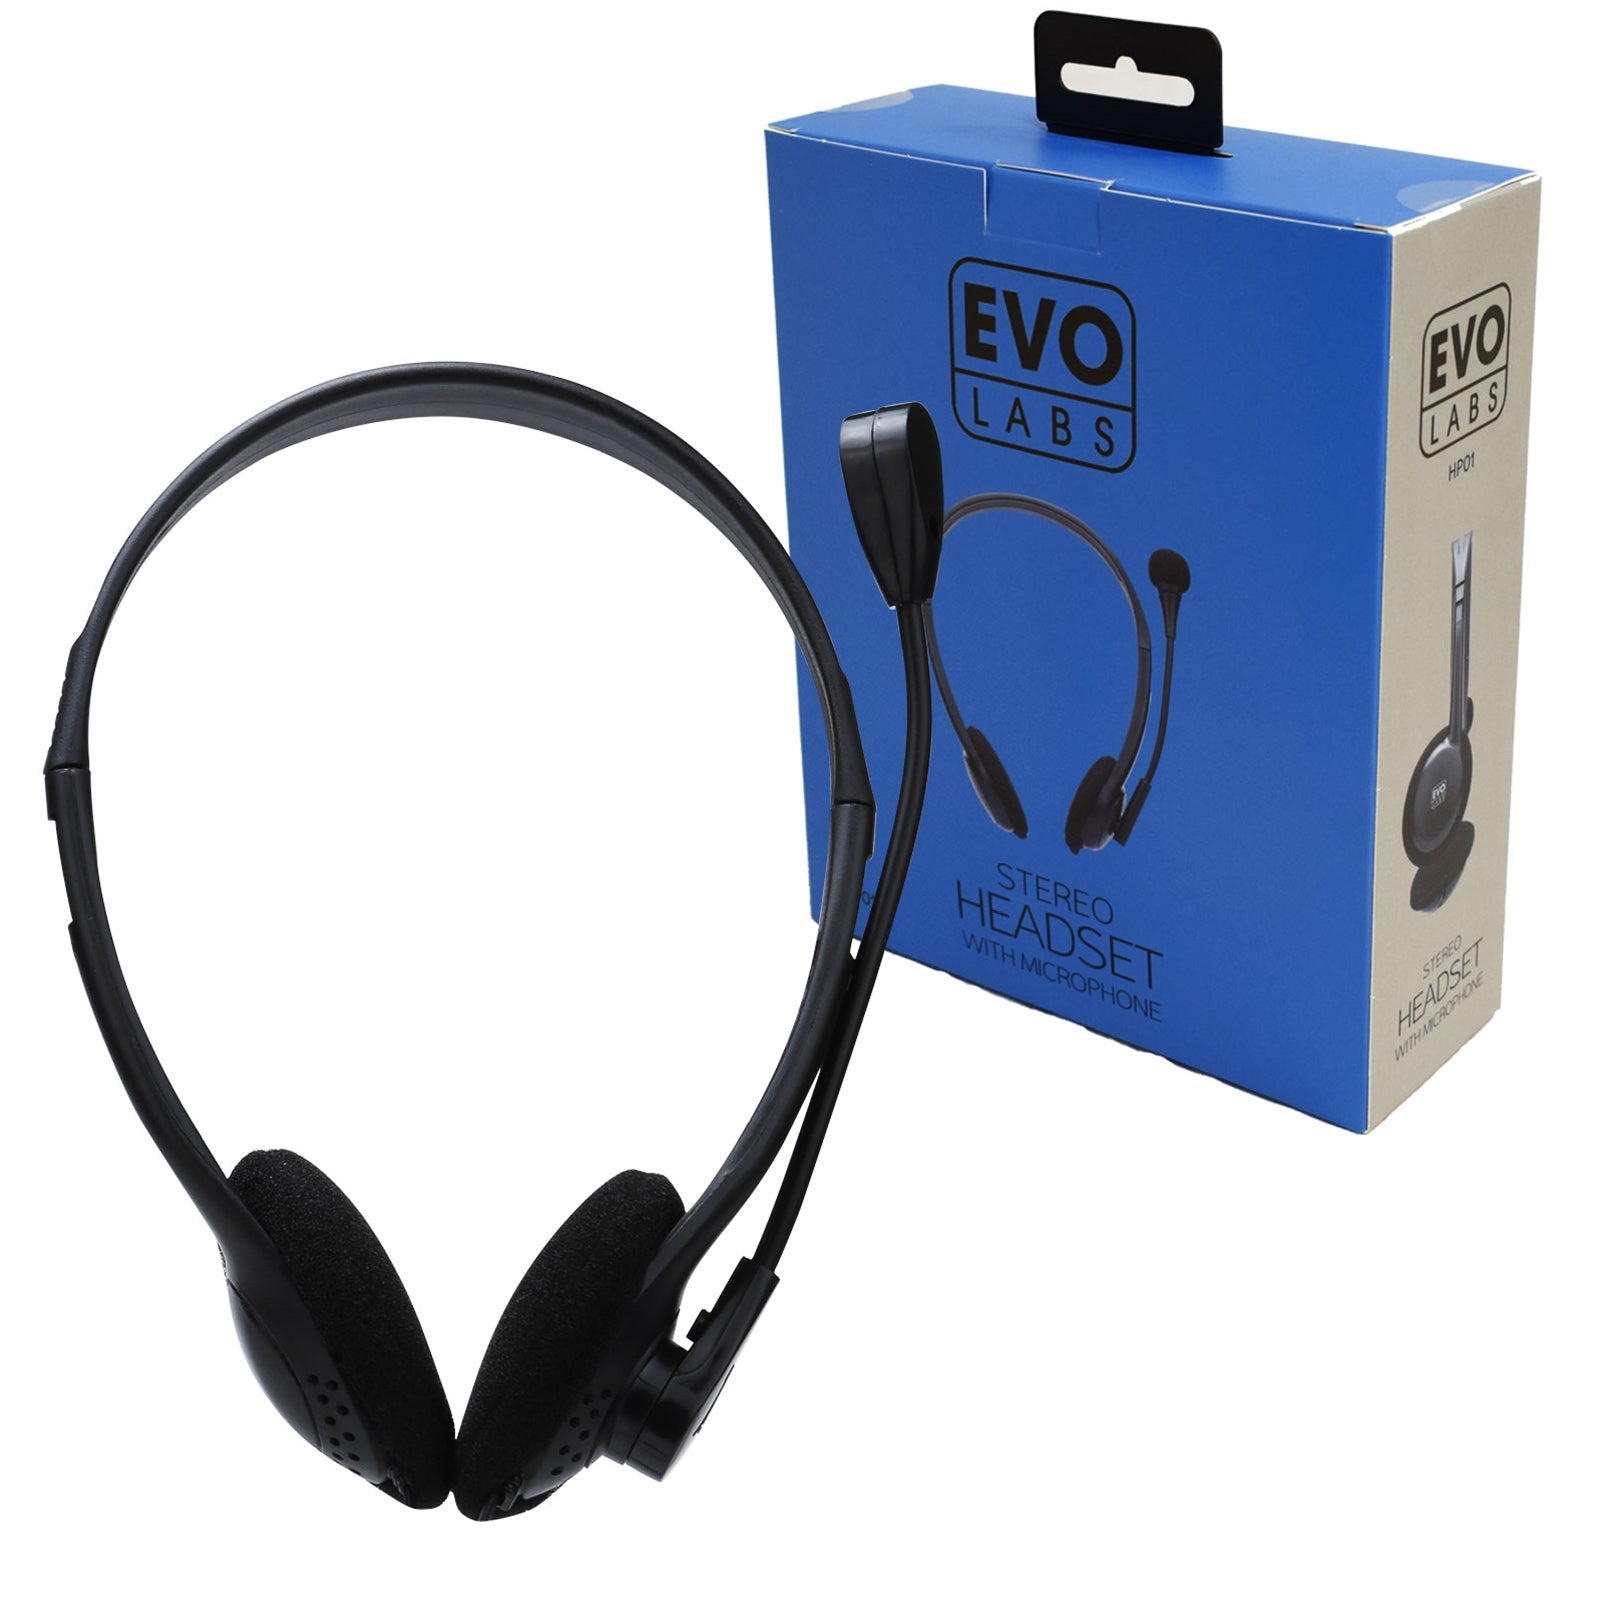 Photos - PC Speaker Evo Labs Evo Labs HP01 Headset with Mic, 2x 3.5mm Connection, Plug and Pla